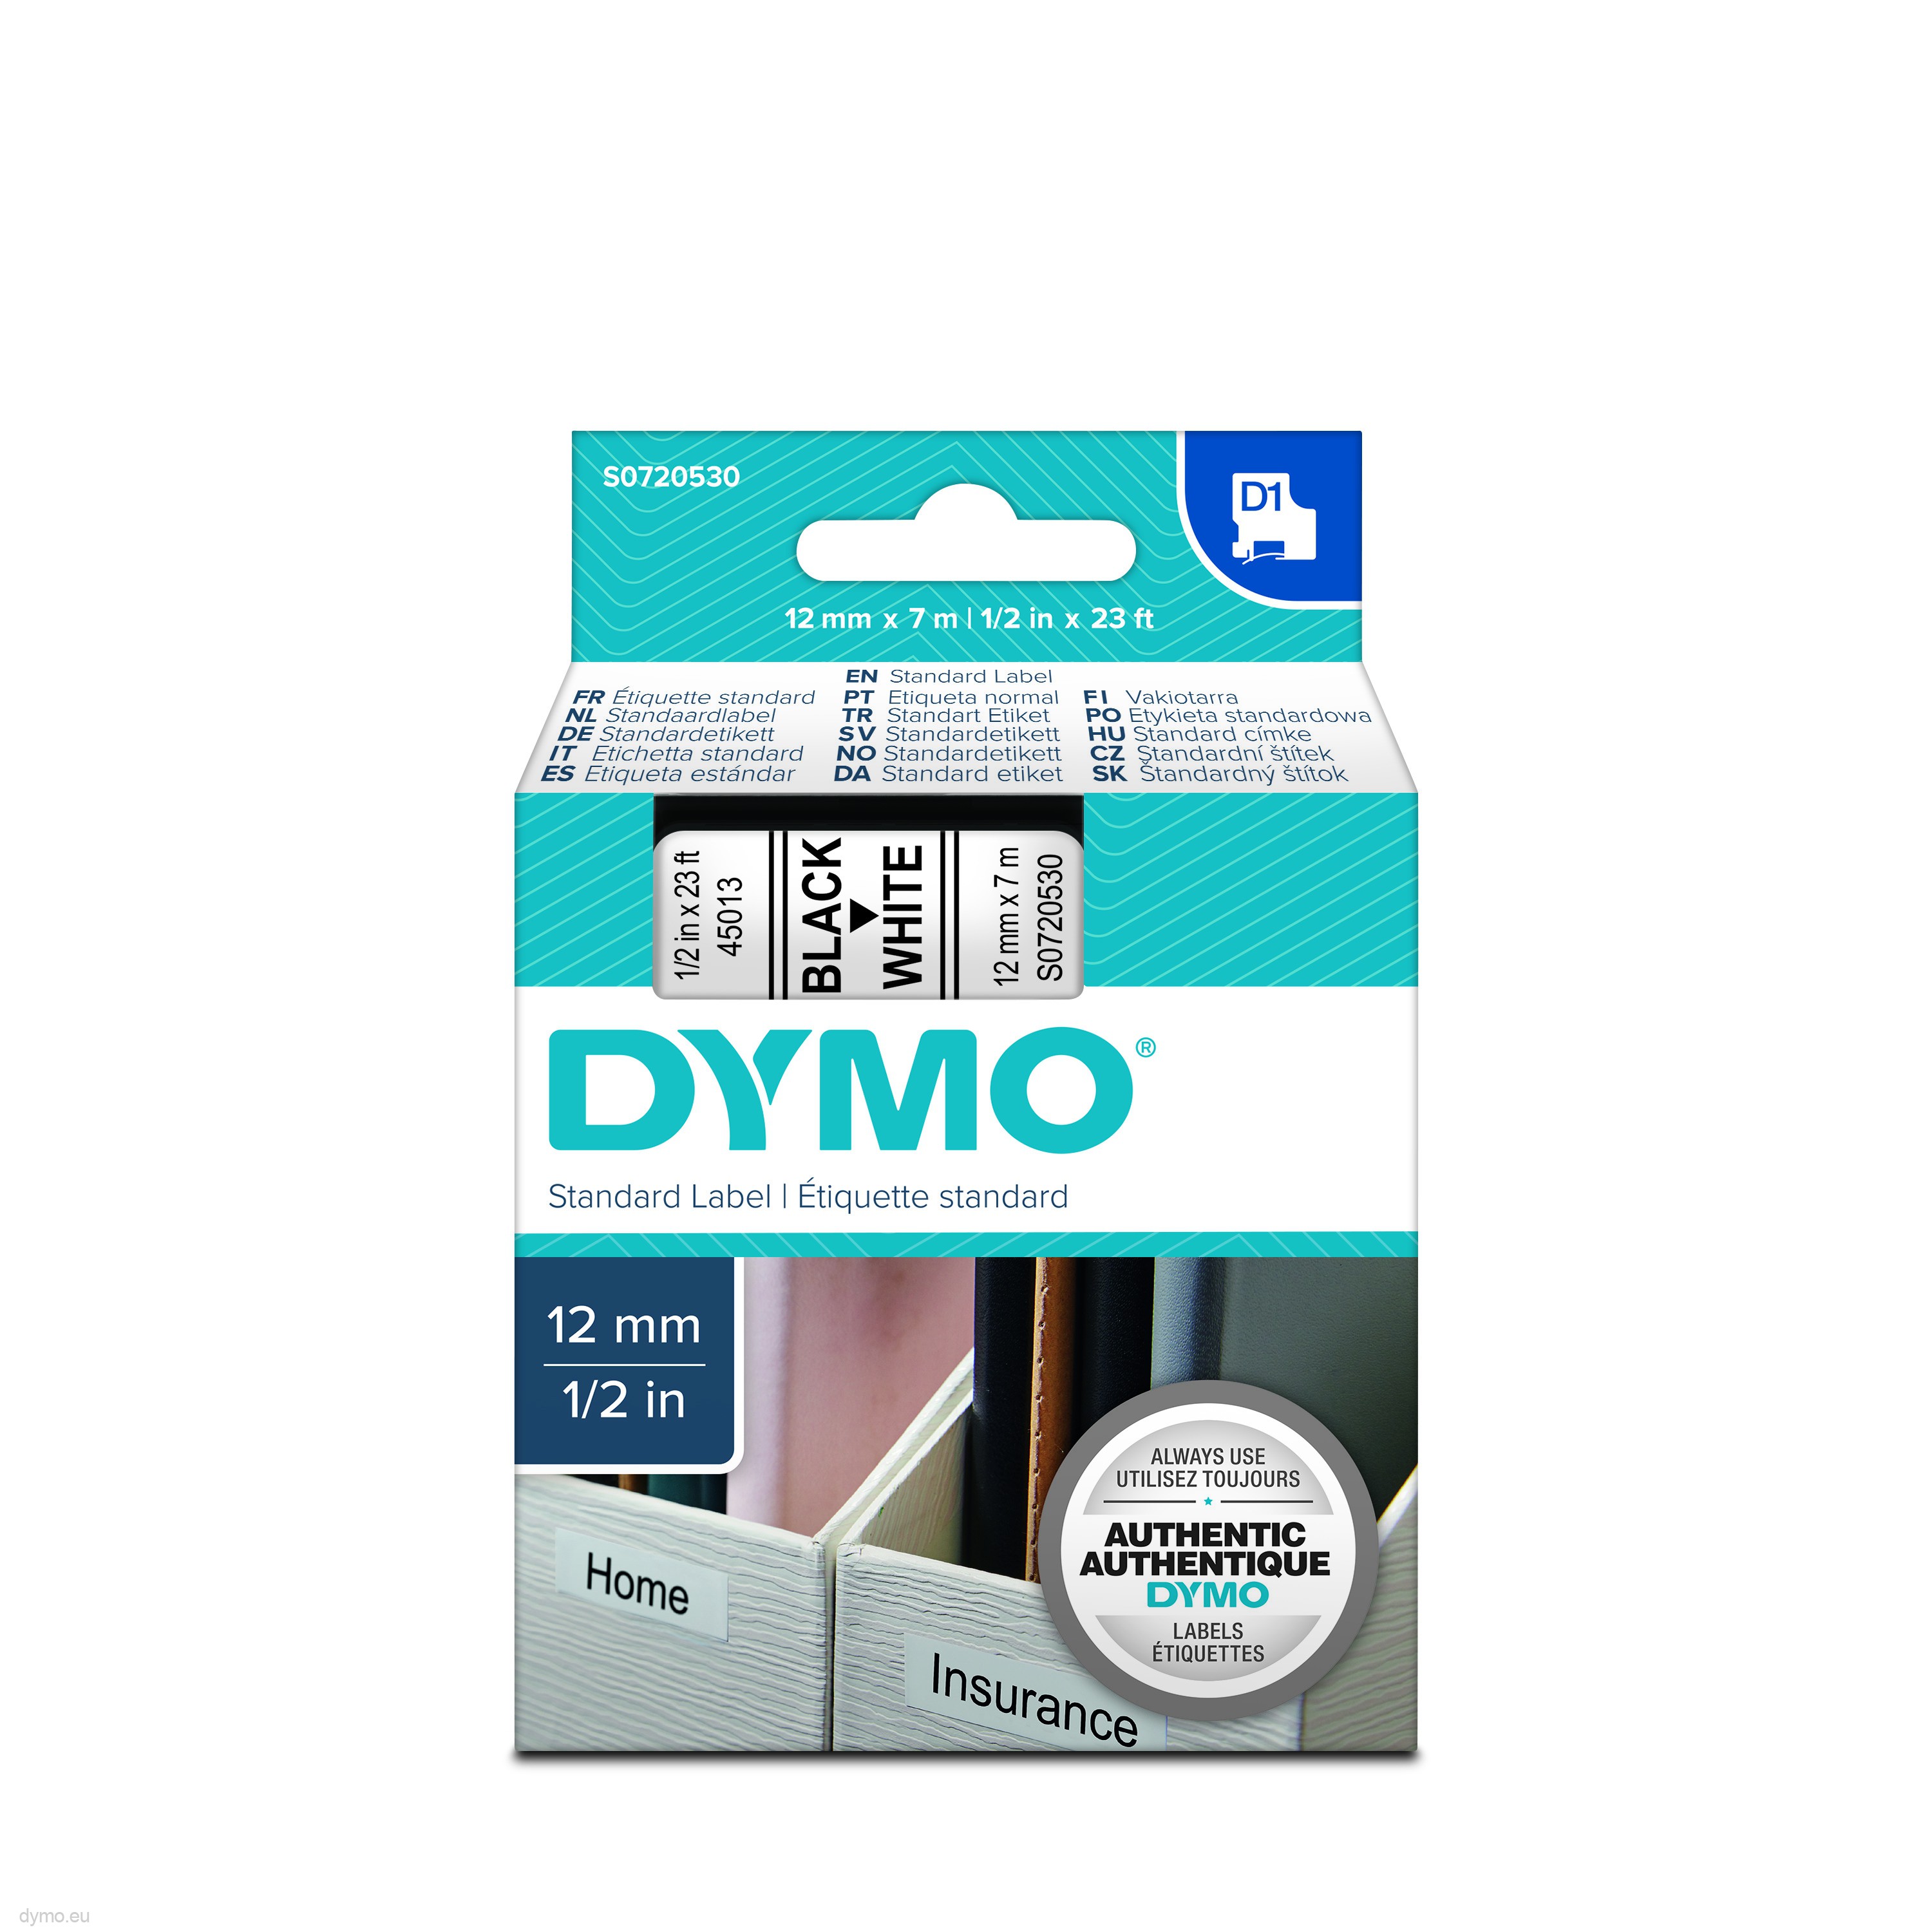 ,Labeling Tape for Dymo LabelManager PnP 160 210D 260P 280 360D 420P Label Maker 7m 12mm Black on White,1/2 Inch x 23 Ft Freshworld 6-Pack Replacement for Dymo D1 Label Tape 45013 S0720530 Refill 